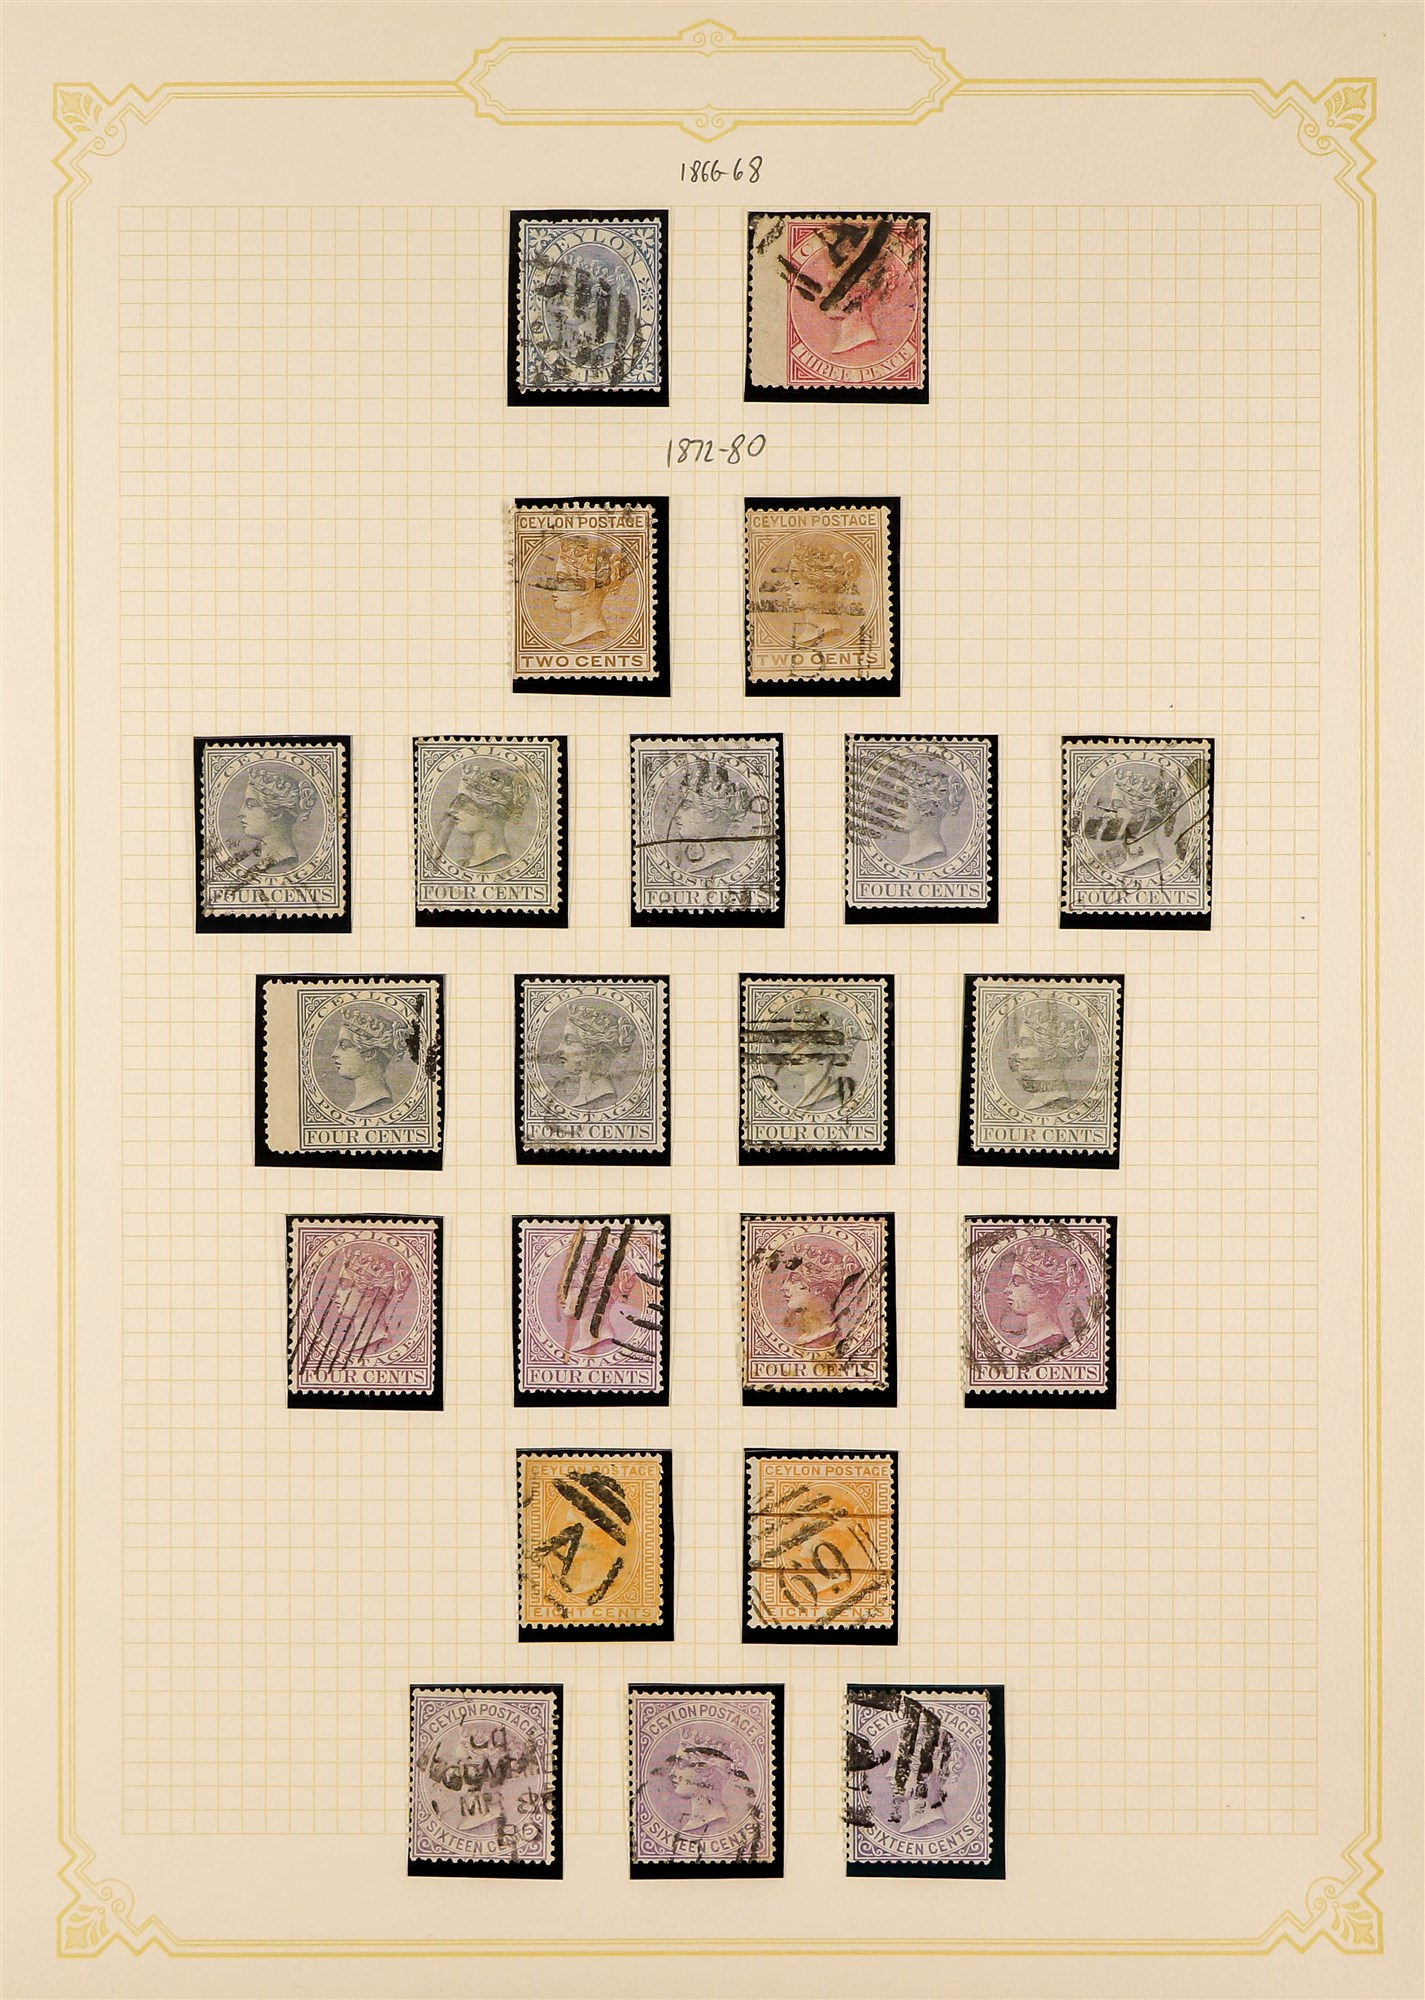 CEYLON 1866 - 1900 COLLECTION of used stamps, comprehensive incl sets, higher values, Officials (